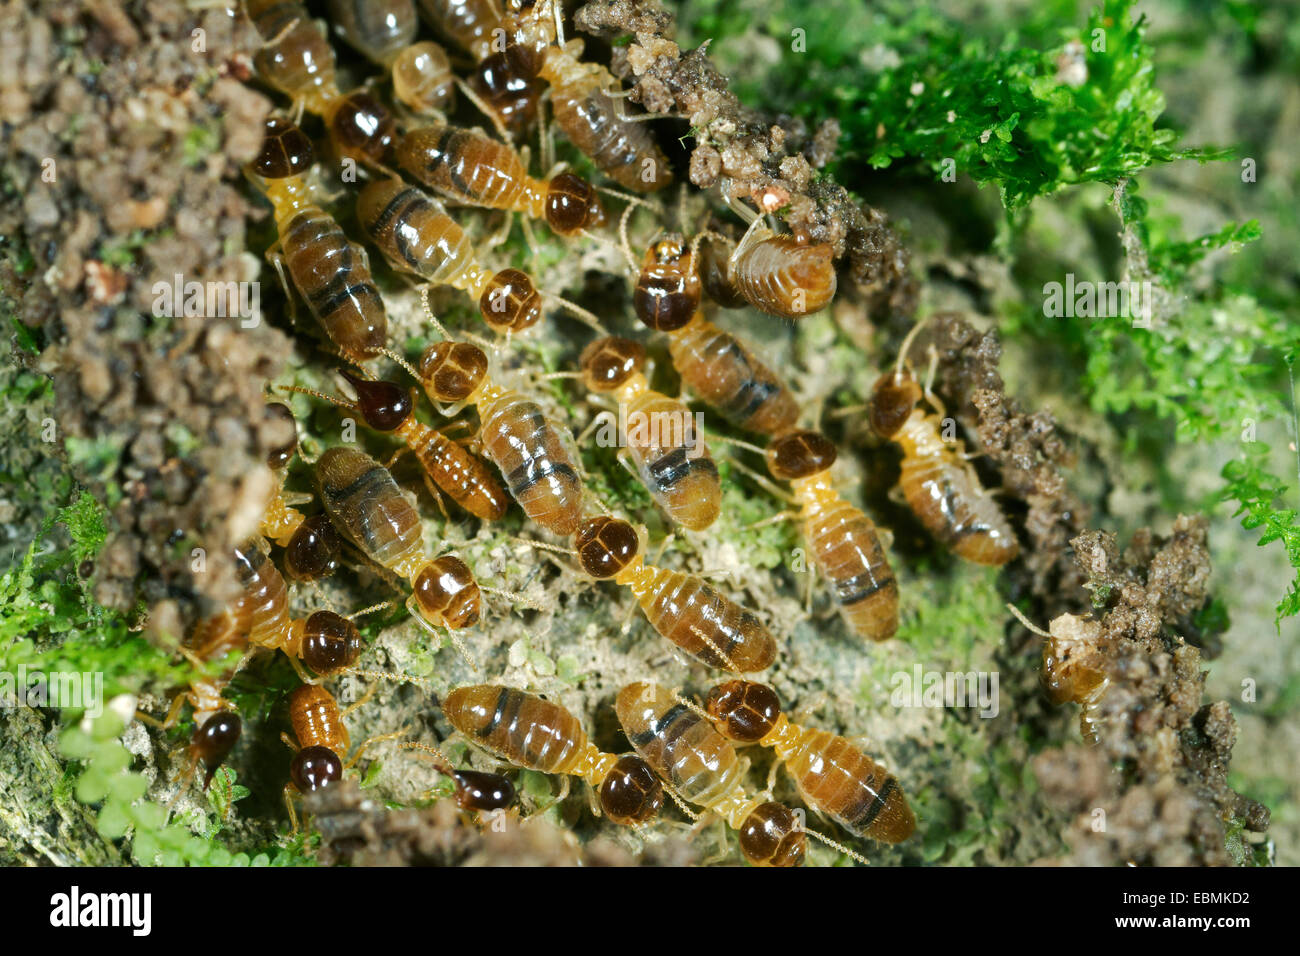 Nasutitermes termites with nose-like appendages on the head for spraying a sticky liquid for defense, termites (Termitidae) Stock Photo